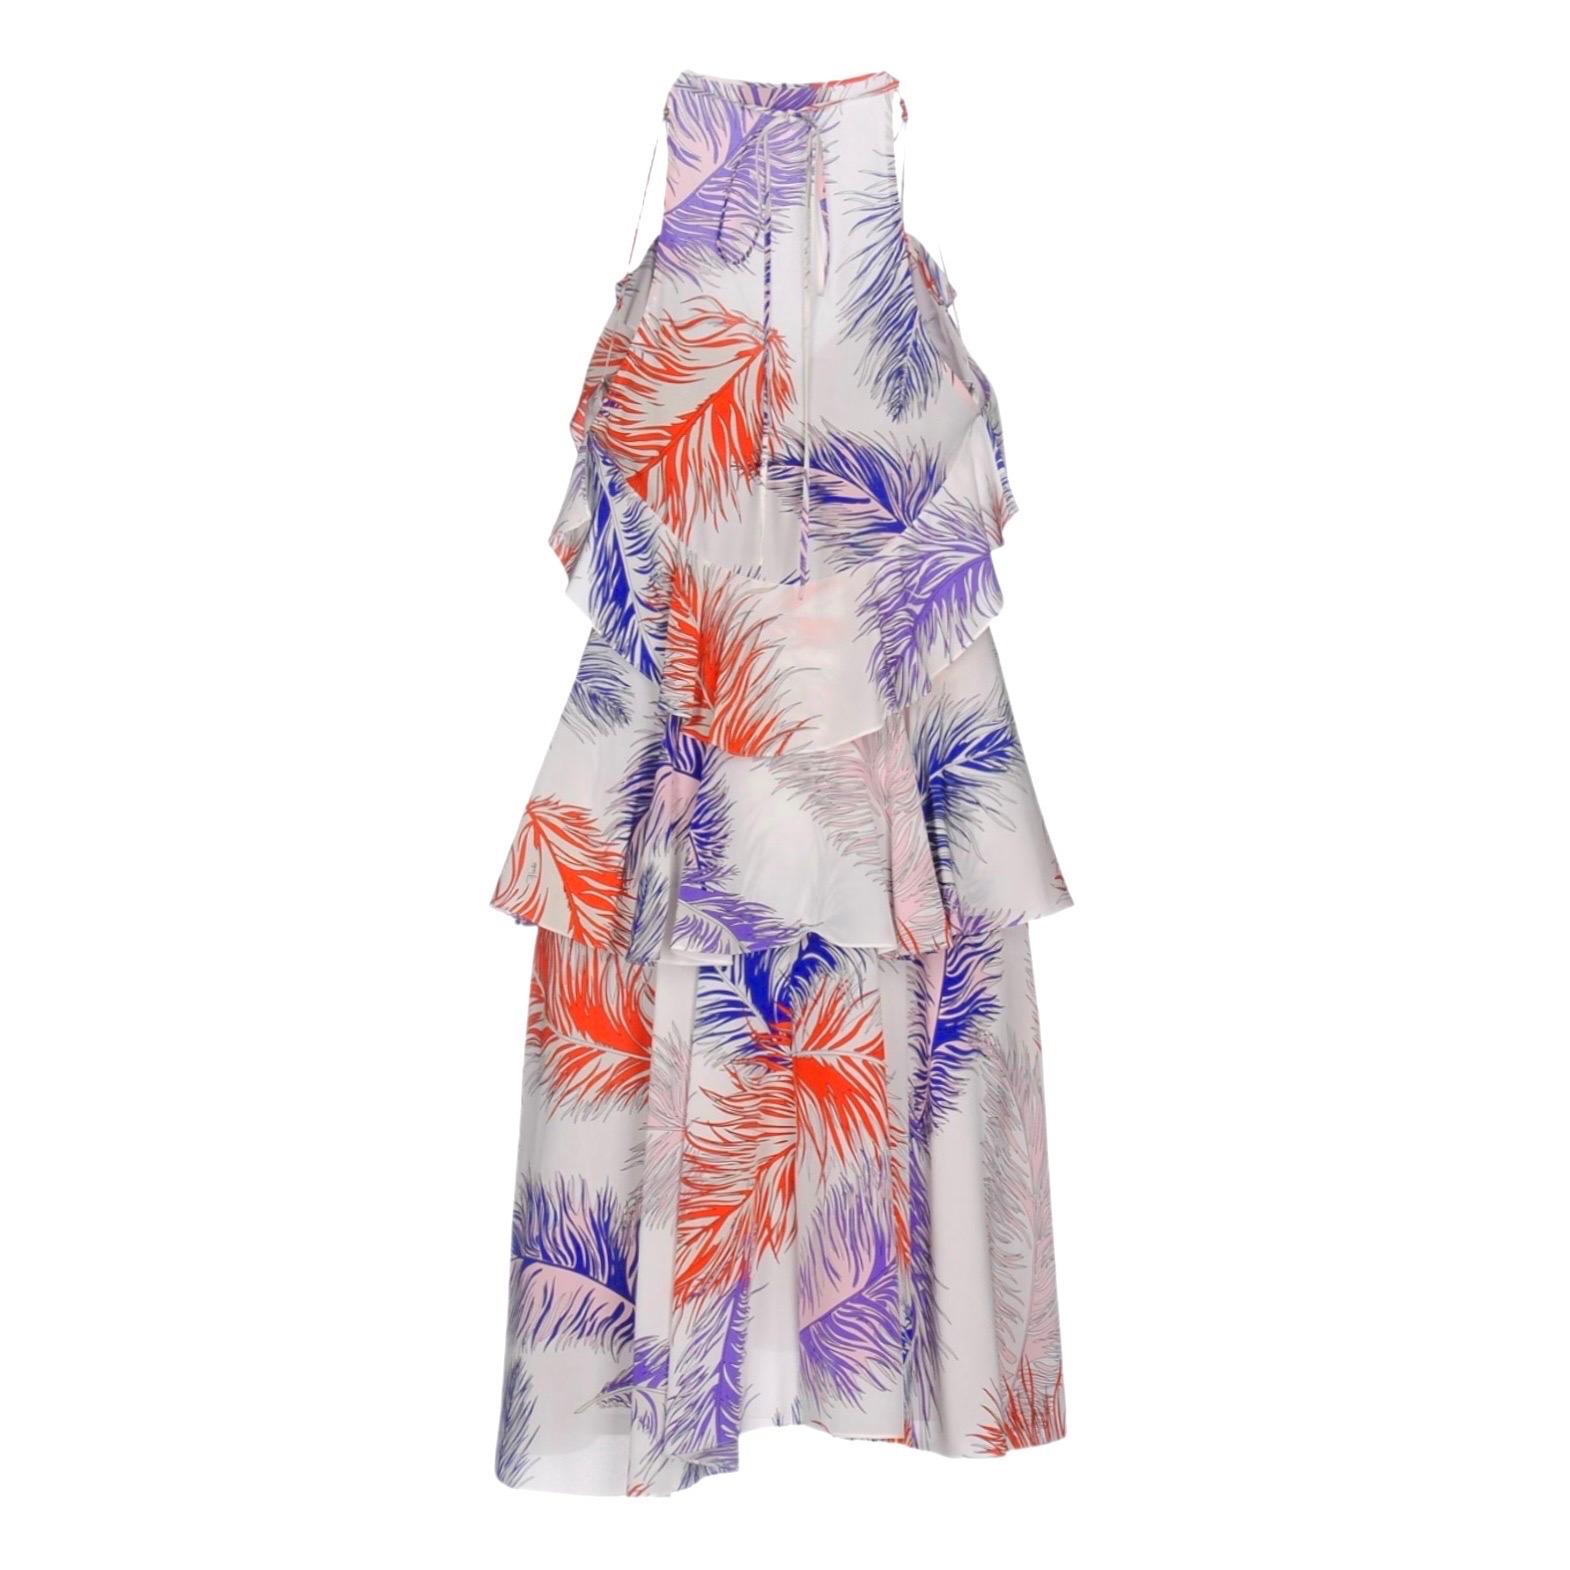 Beautiful Emilio Pucci Silk Dress
In the famous signature feather print
